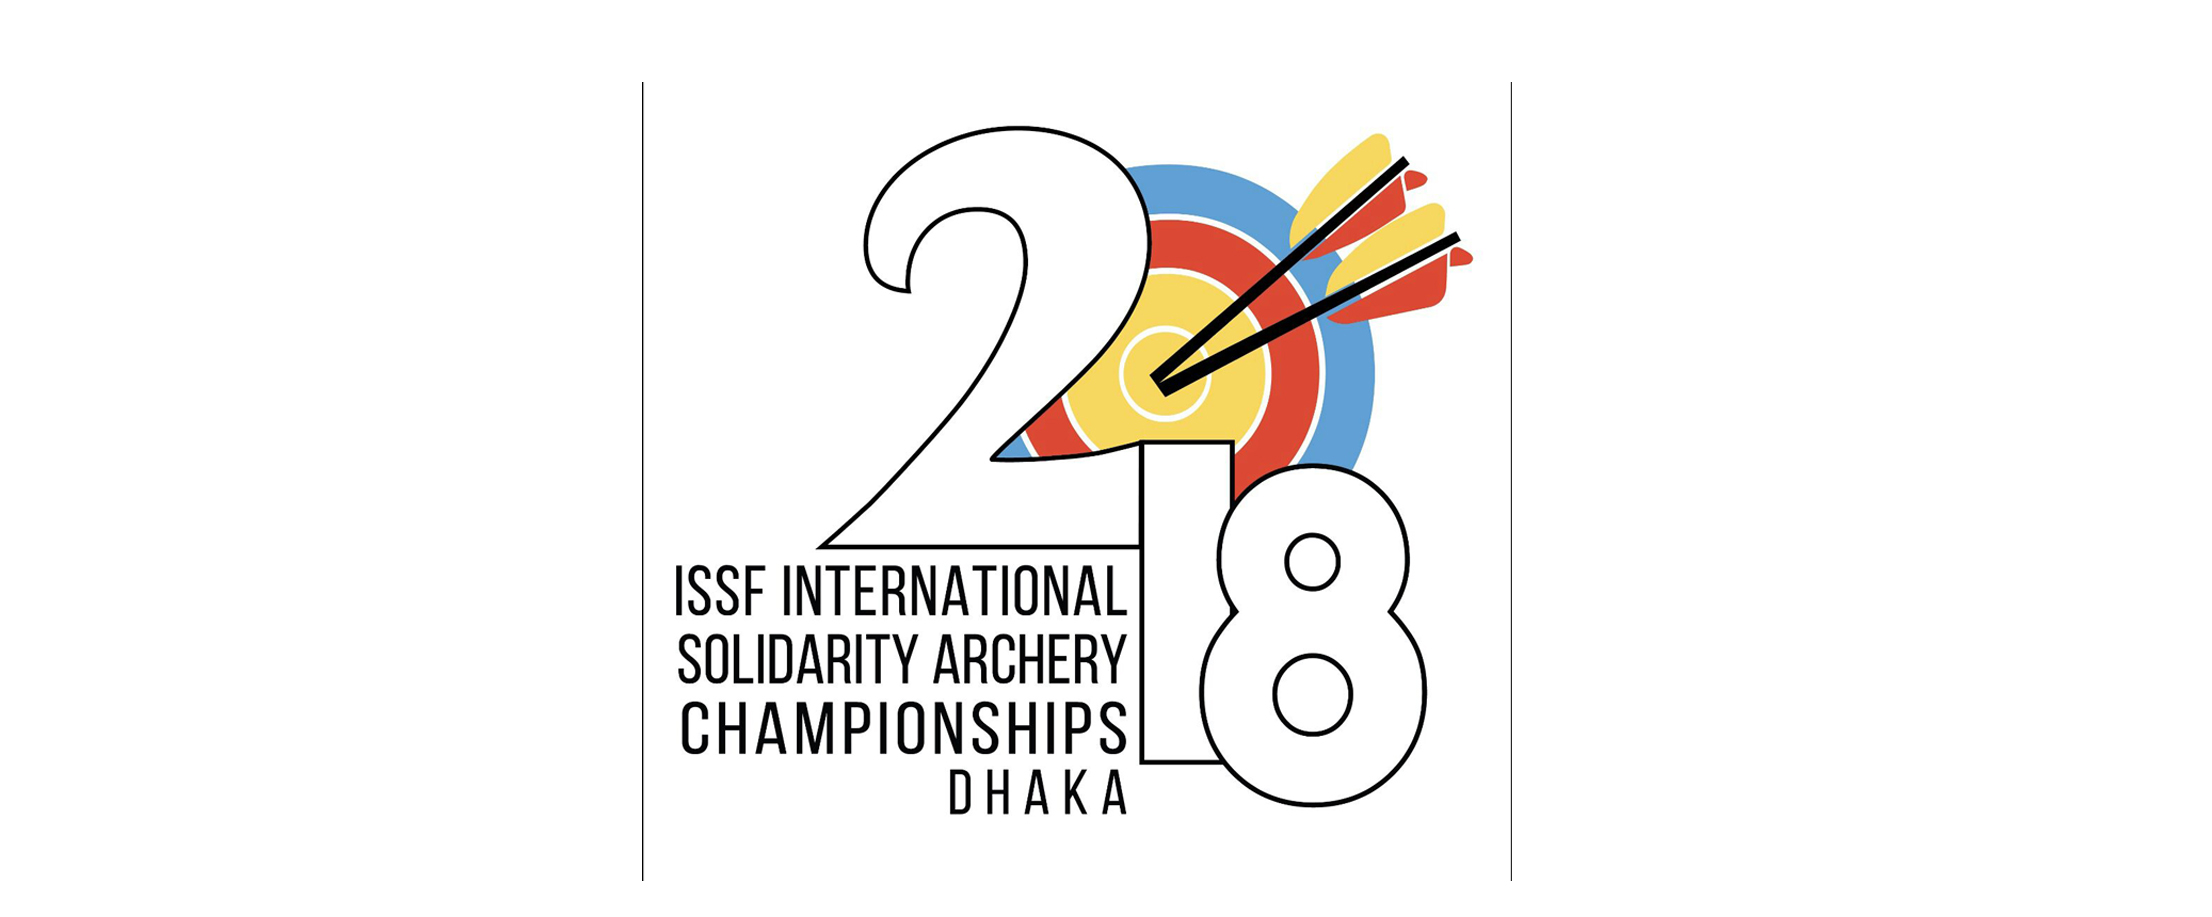  The 2nd ISSF International Solidarity Archery Championships